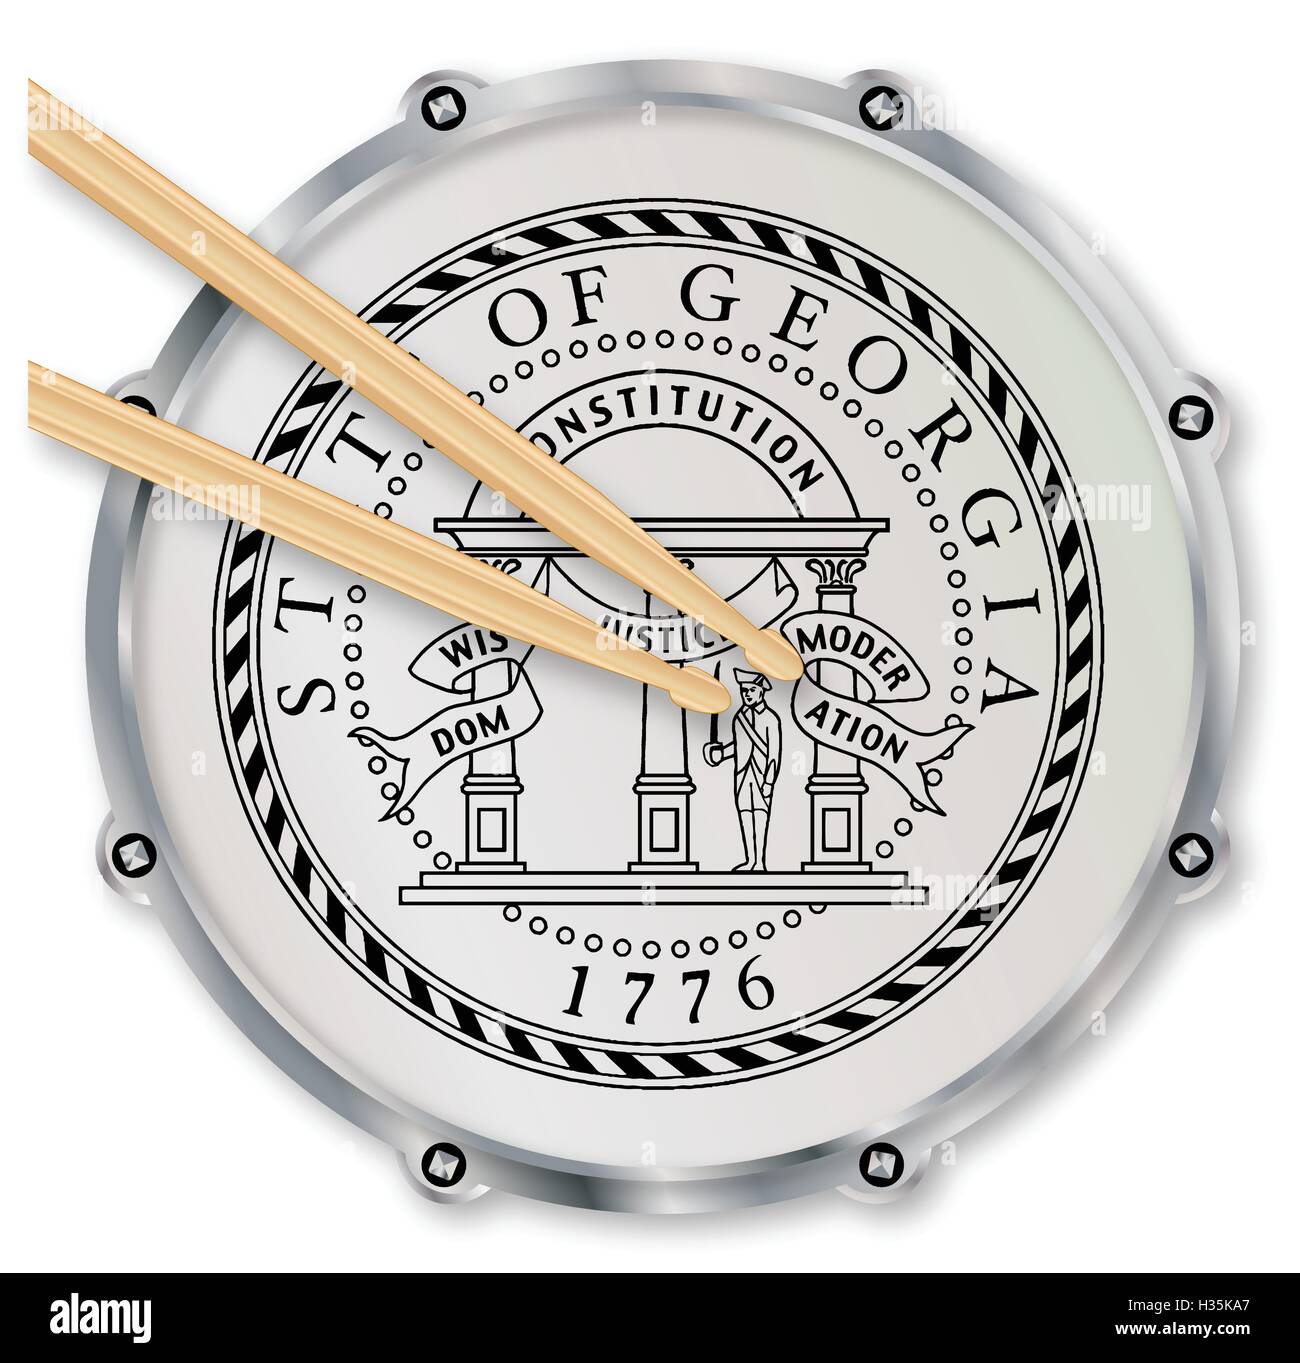 Georgia state seal snare drum batter head with tuning screws and  with drumsticks over a white background Stock Vector